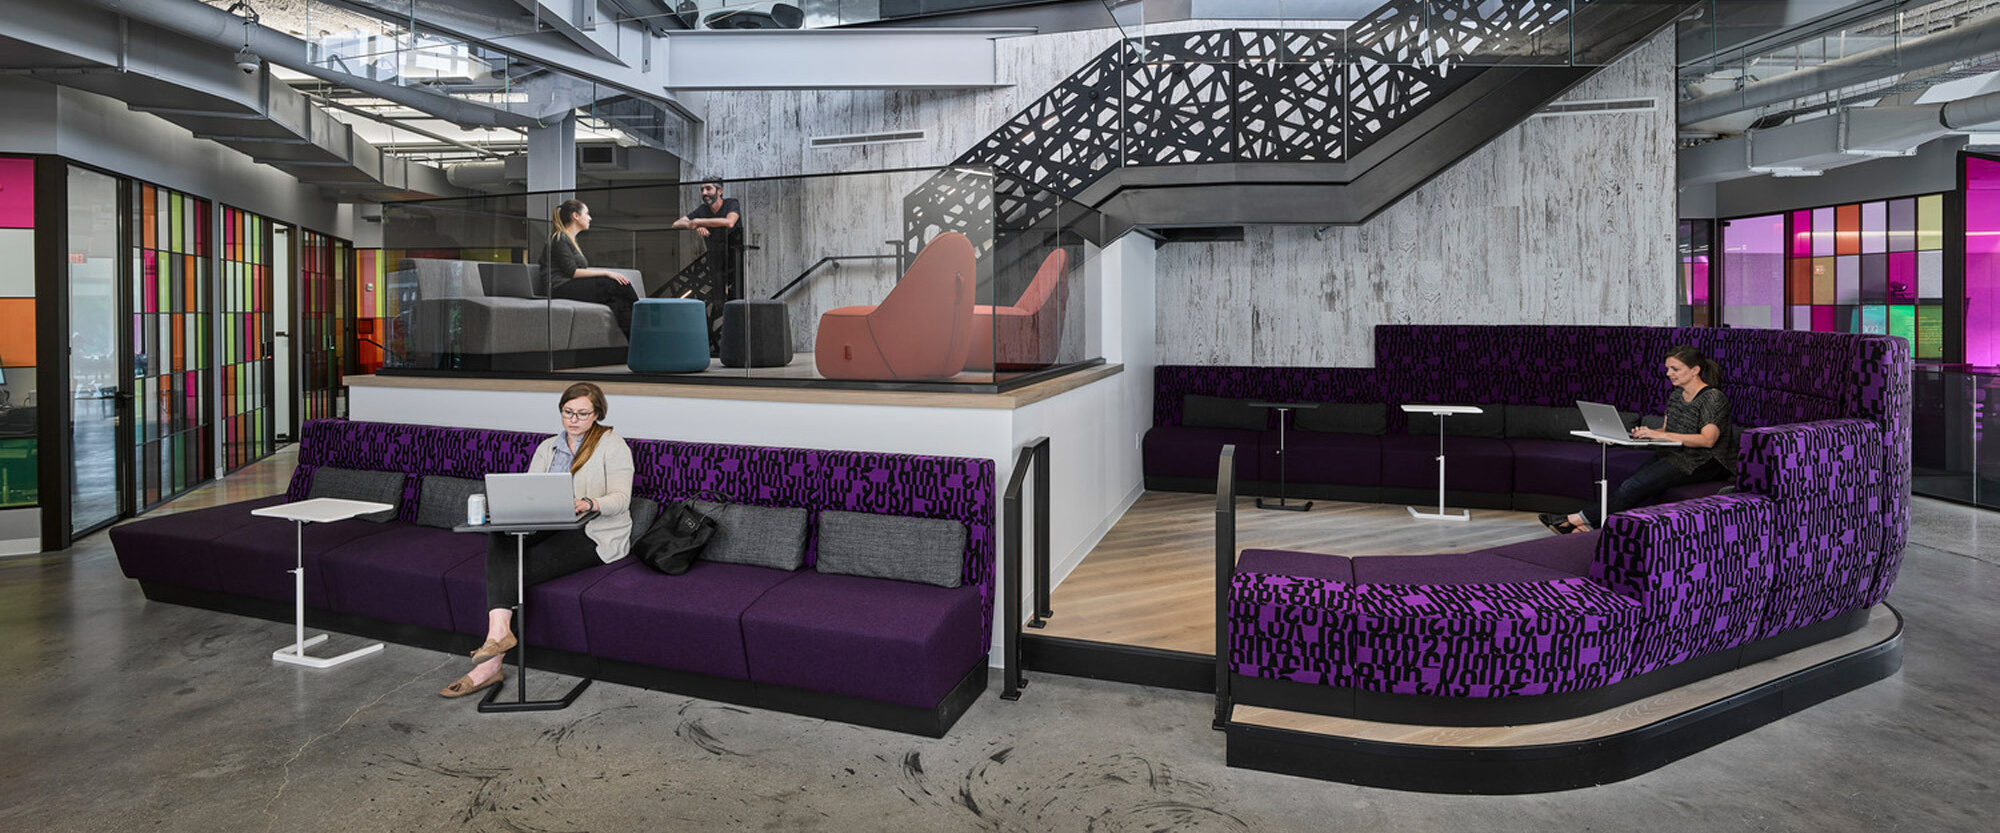 Modern office lobby featuring eclectic furnishings with purple upholstery patterns, a central geometric staircase with metal finishes, and vibrant stained-glass panels contributing to a dynamic and creative workspace atmosphere.